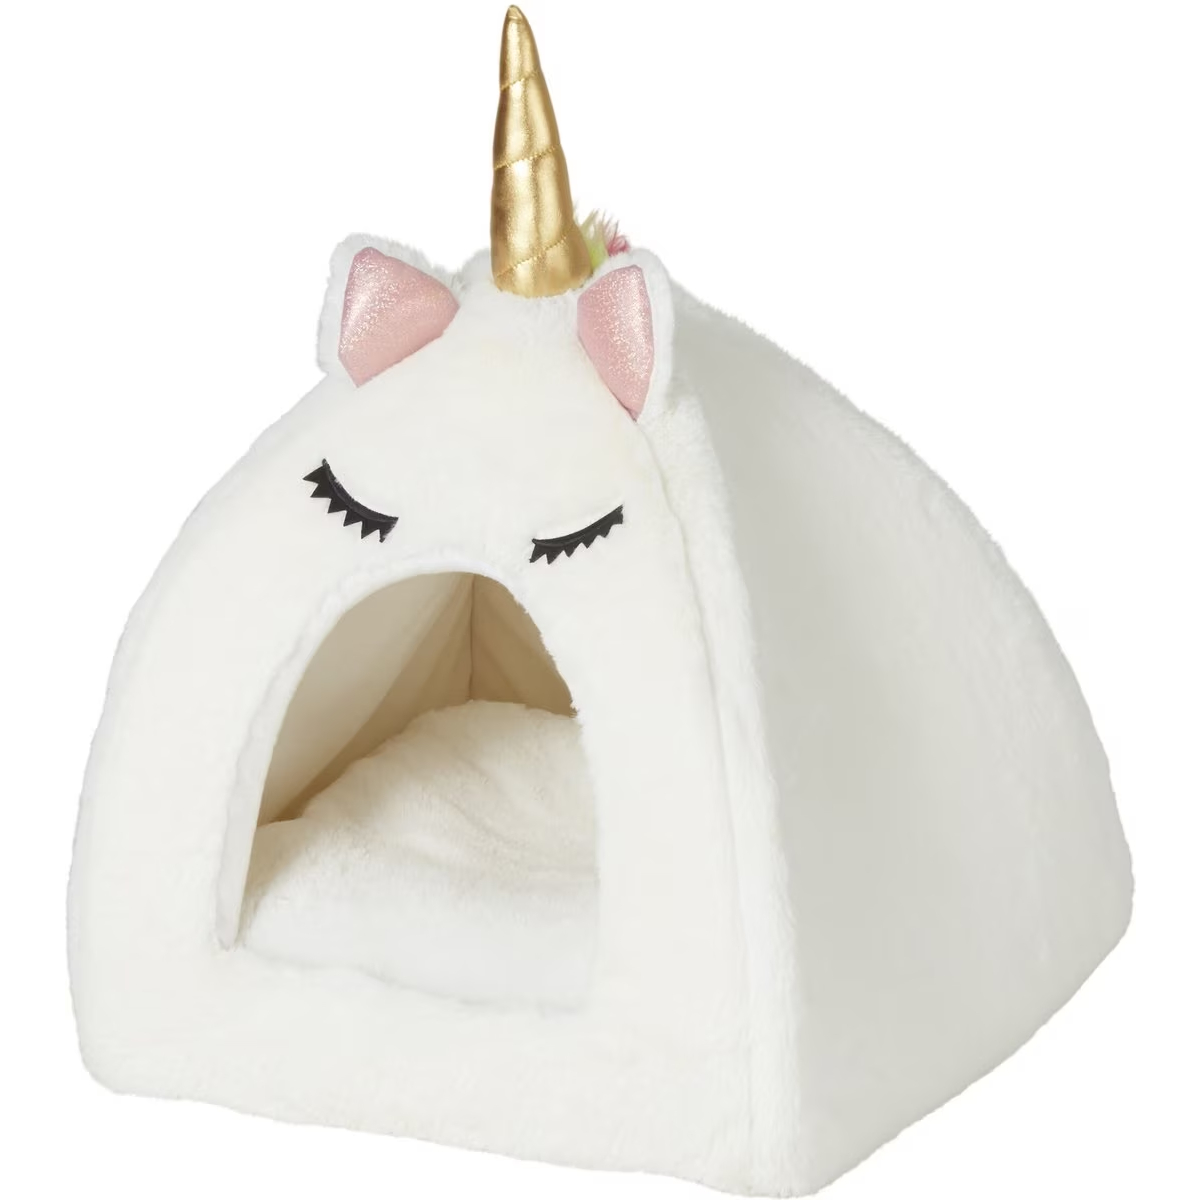 Frisco Unicorn Covered Tent Cat Bed New